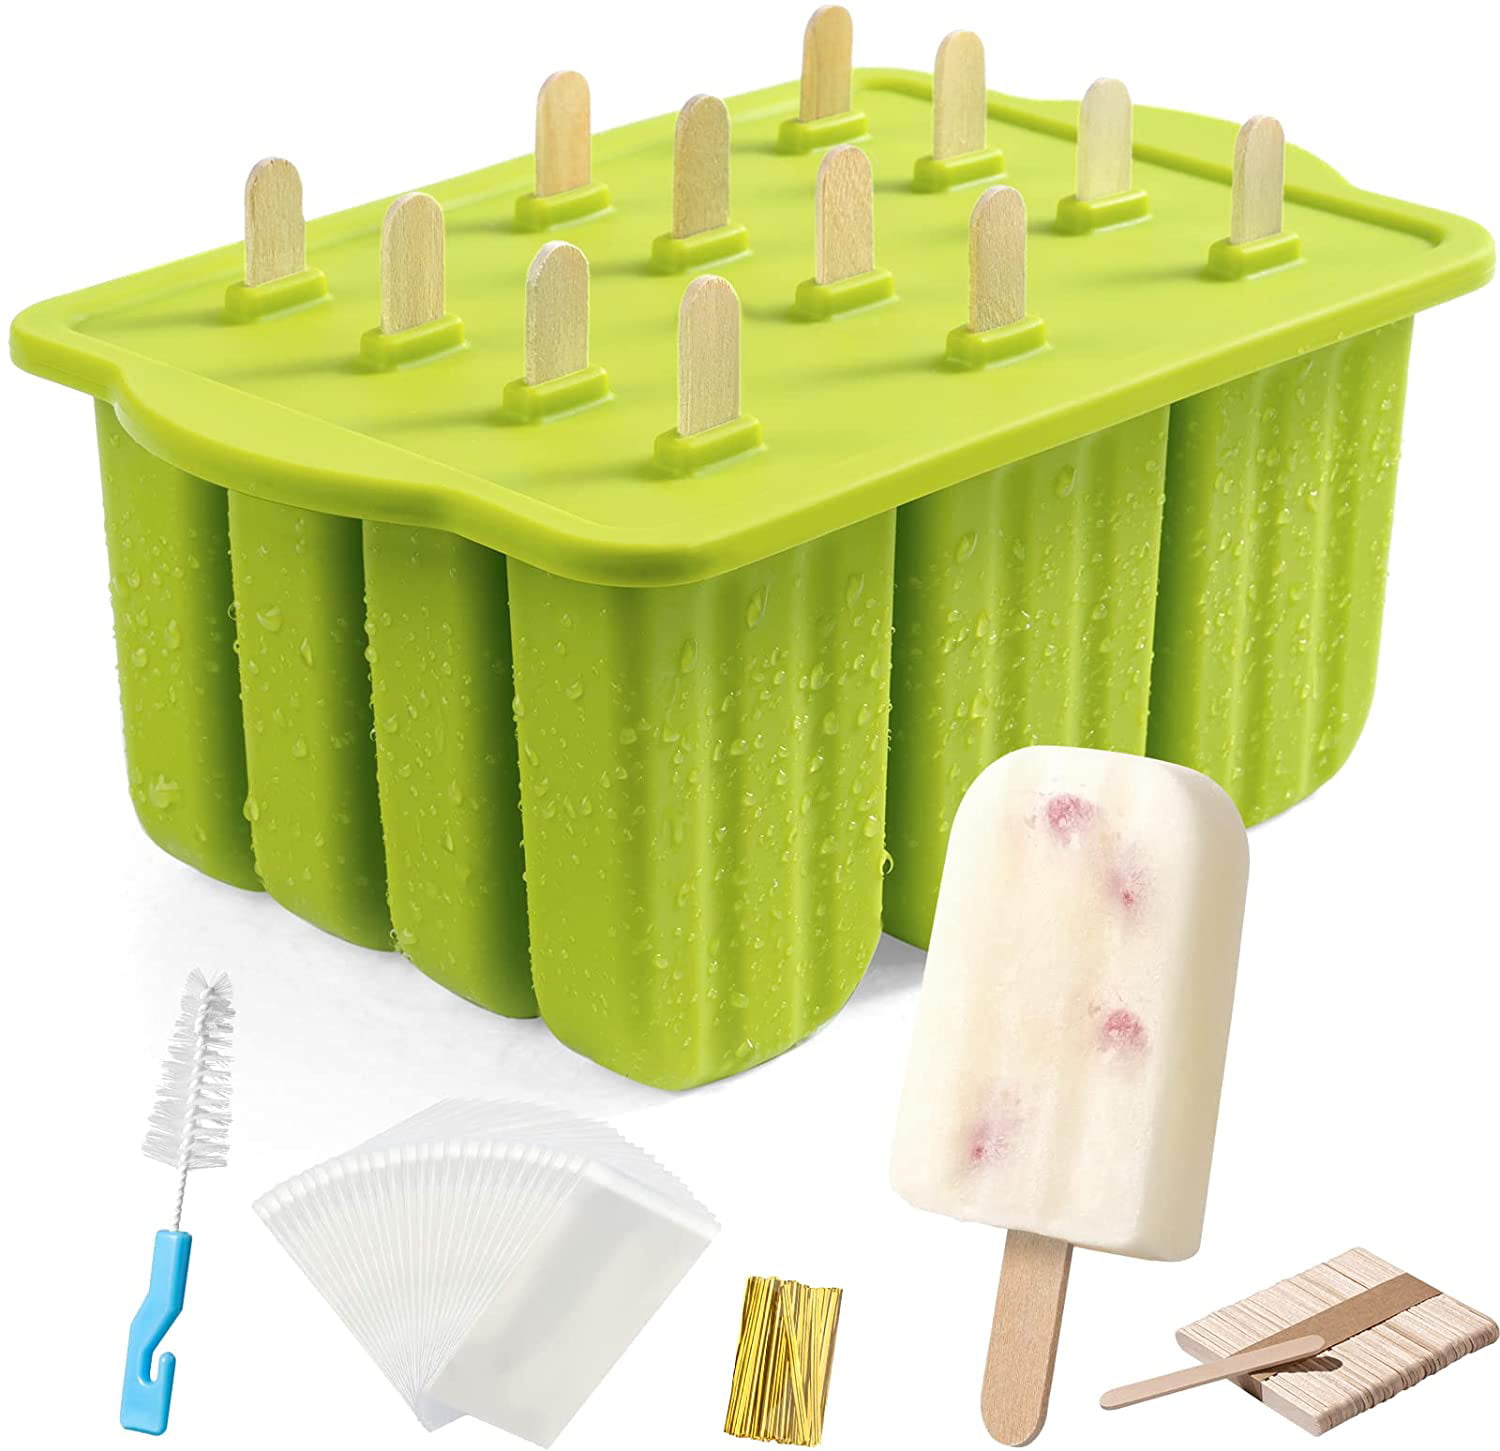 6-PCS Silicone Popsicle Mould DIY Reusable Ice Pop Molds Trays for Homemade Popsicles 